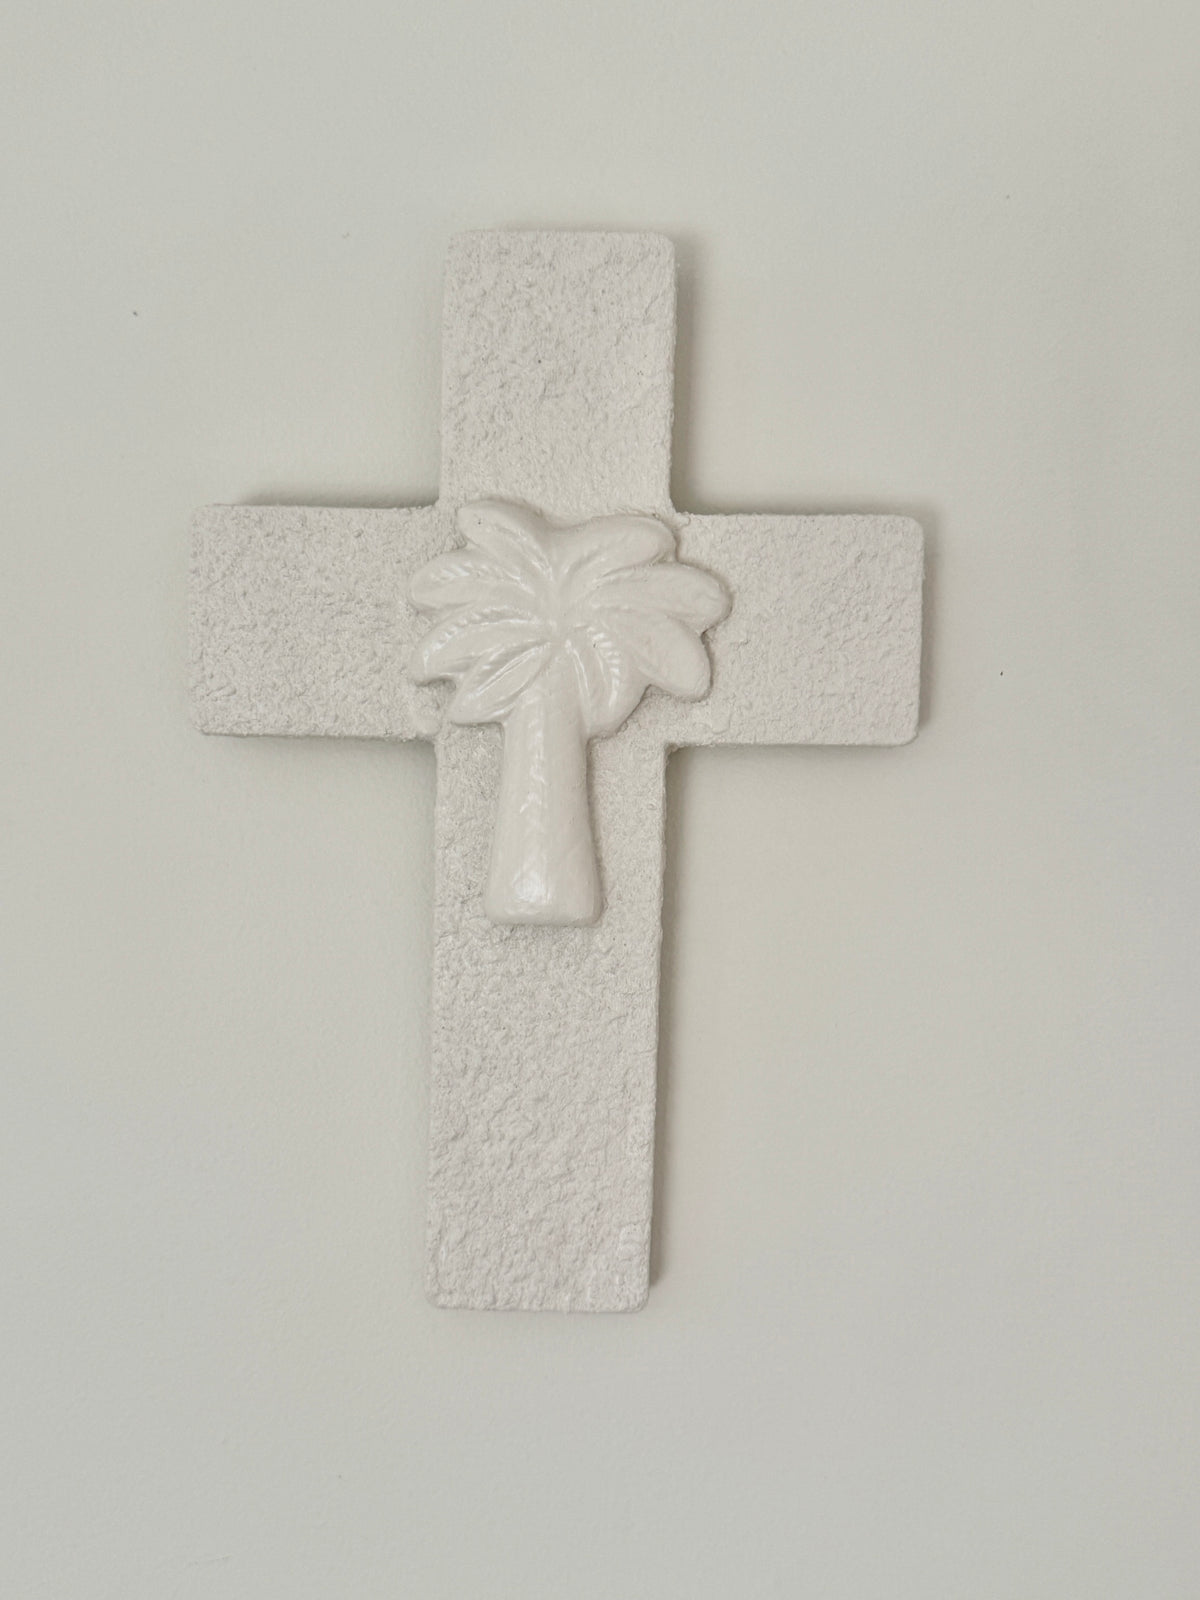 Wall Tile - White Palm - Large Cross